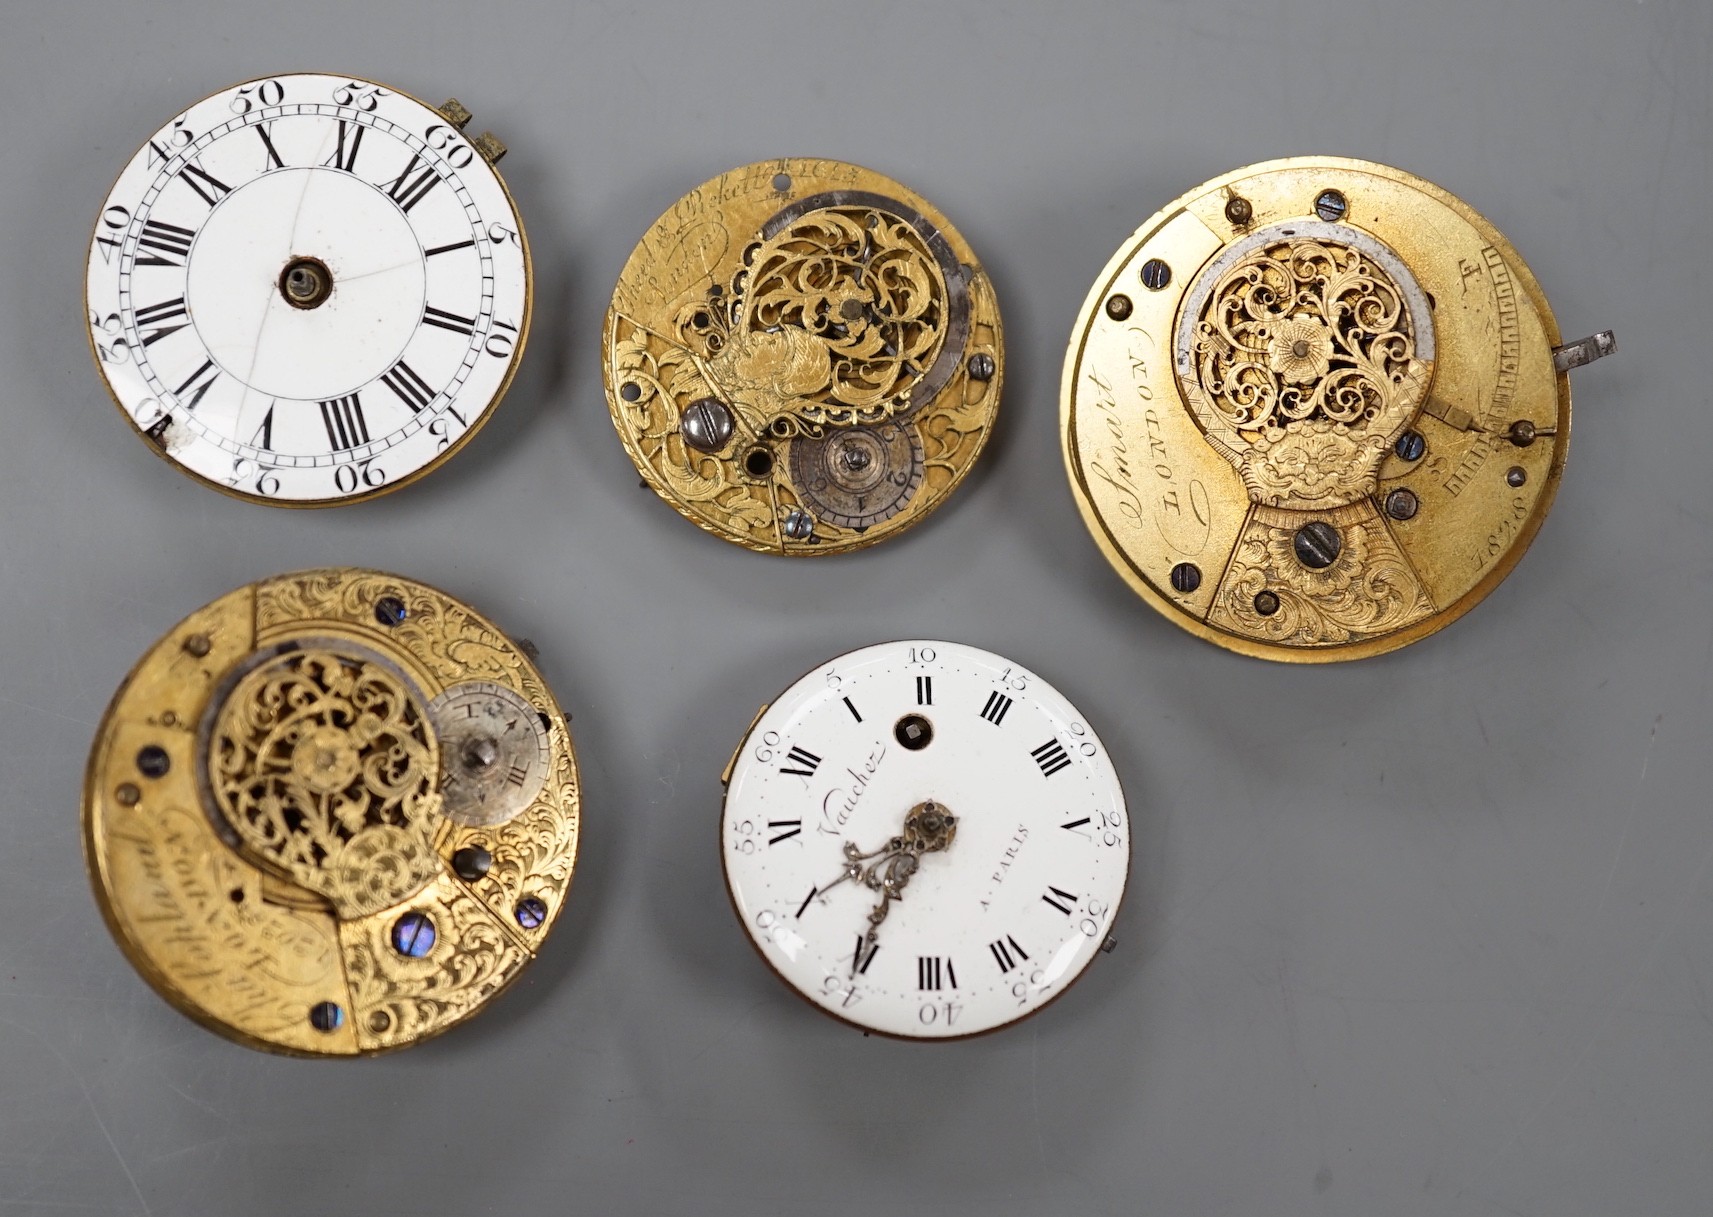 Five assorted 19th century pocket watch movements/accessories including English by Smart of London and French by Vaucher of Paris.